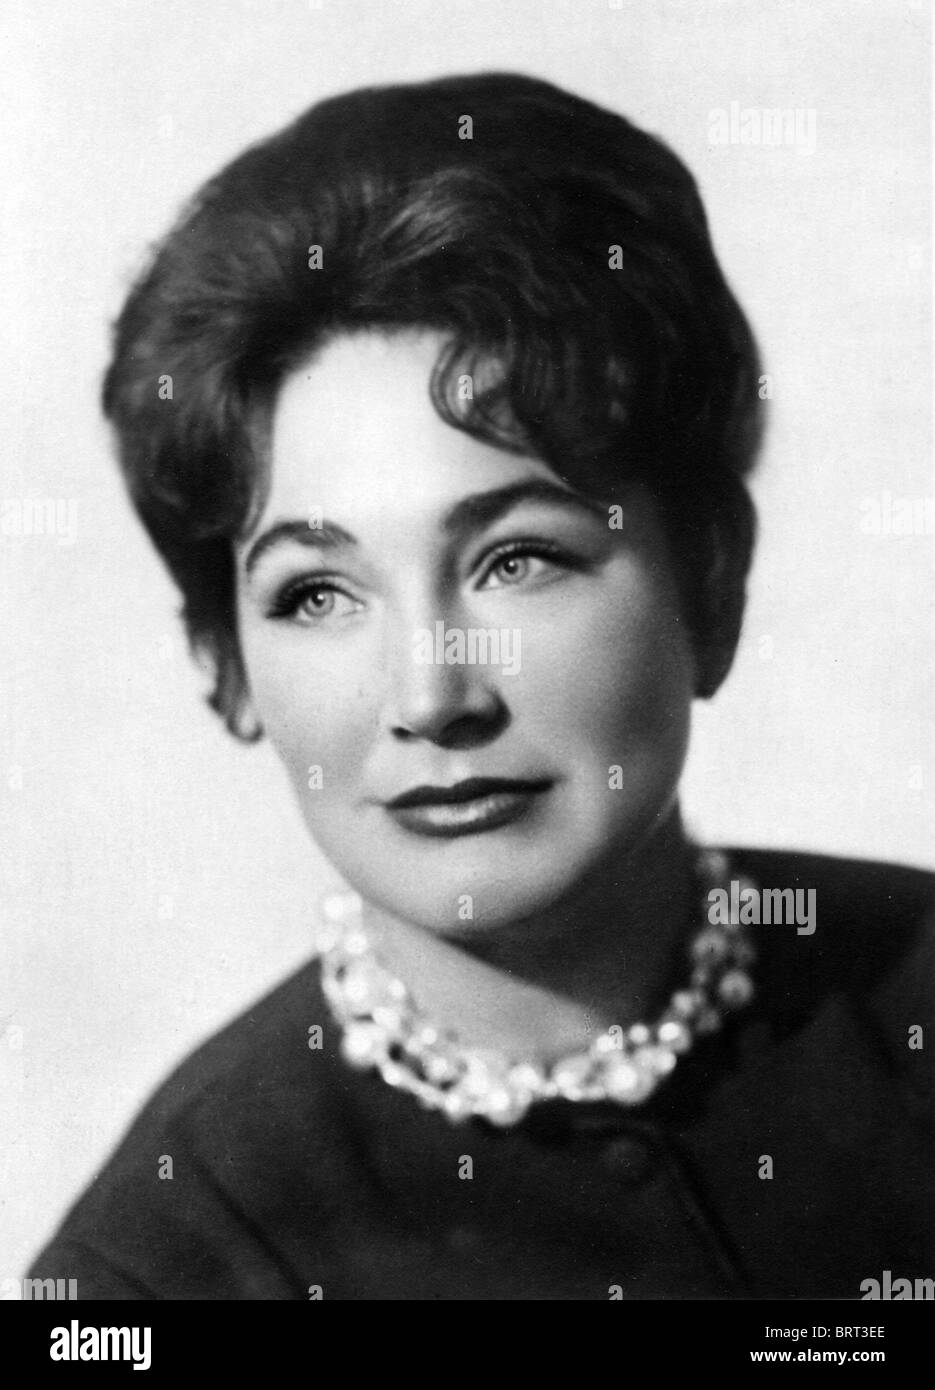 Ludmila Black and White Stock Photos & Images - Alamy